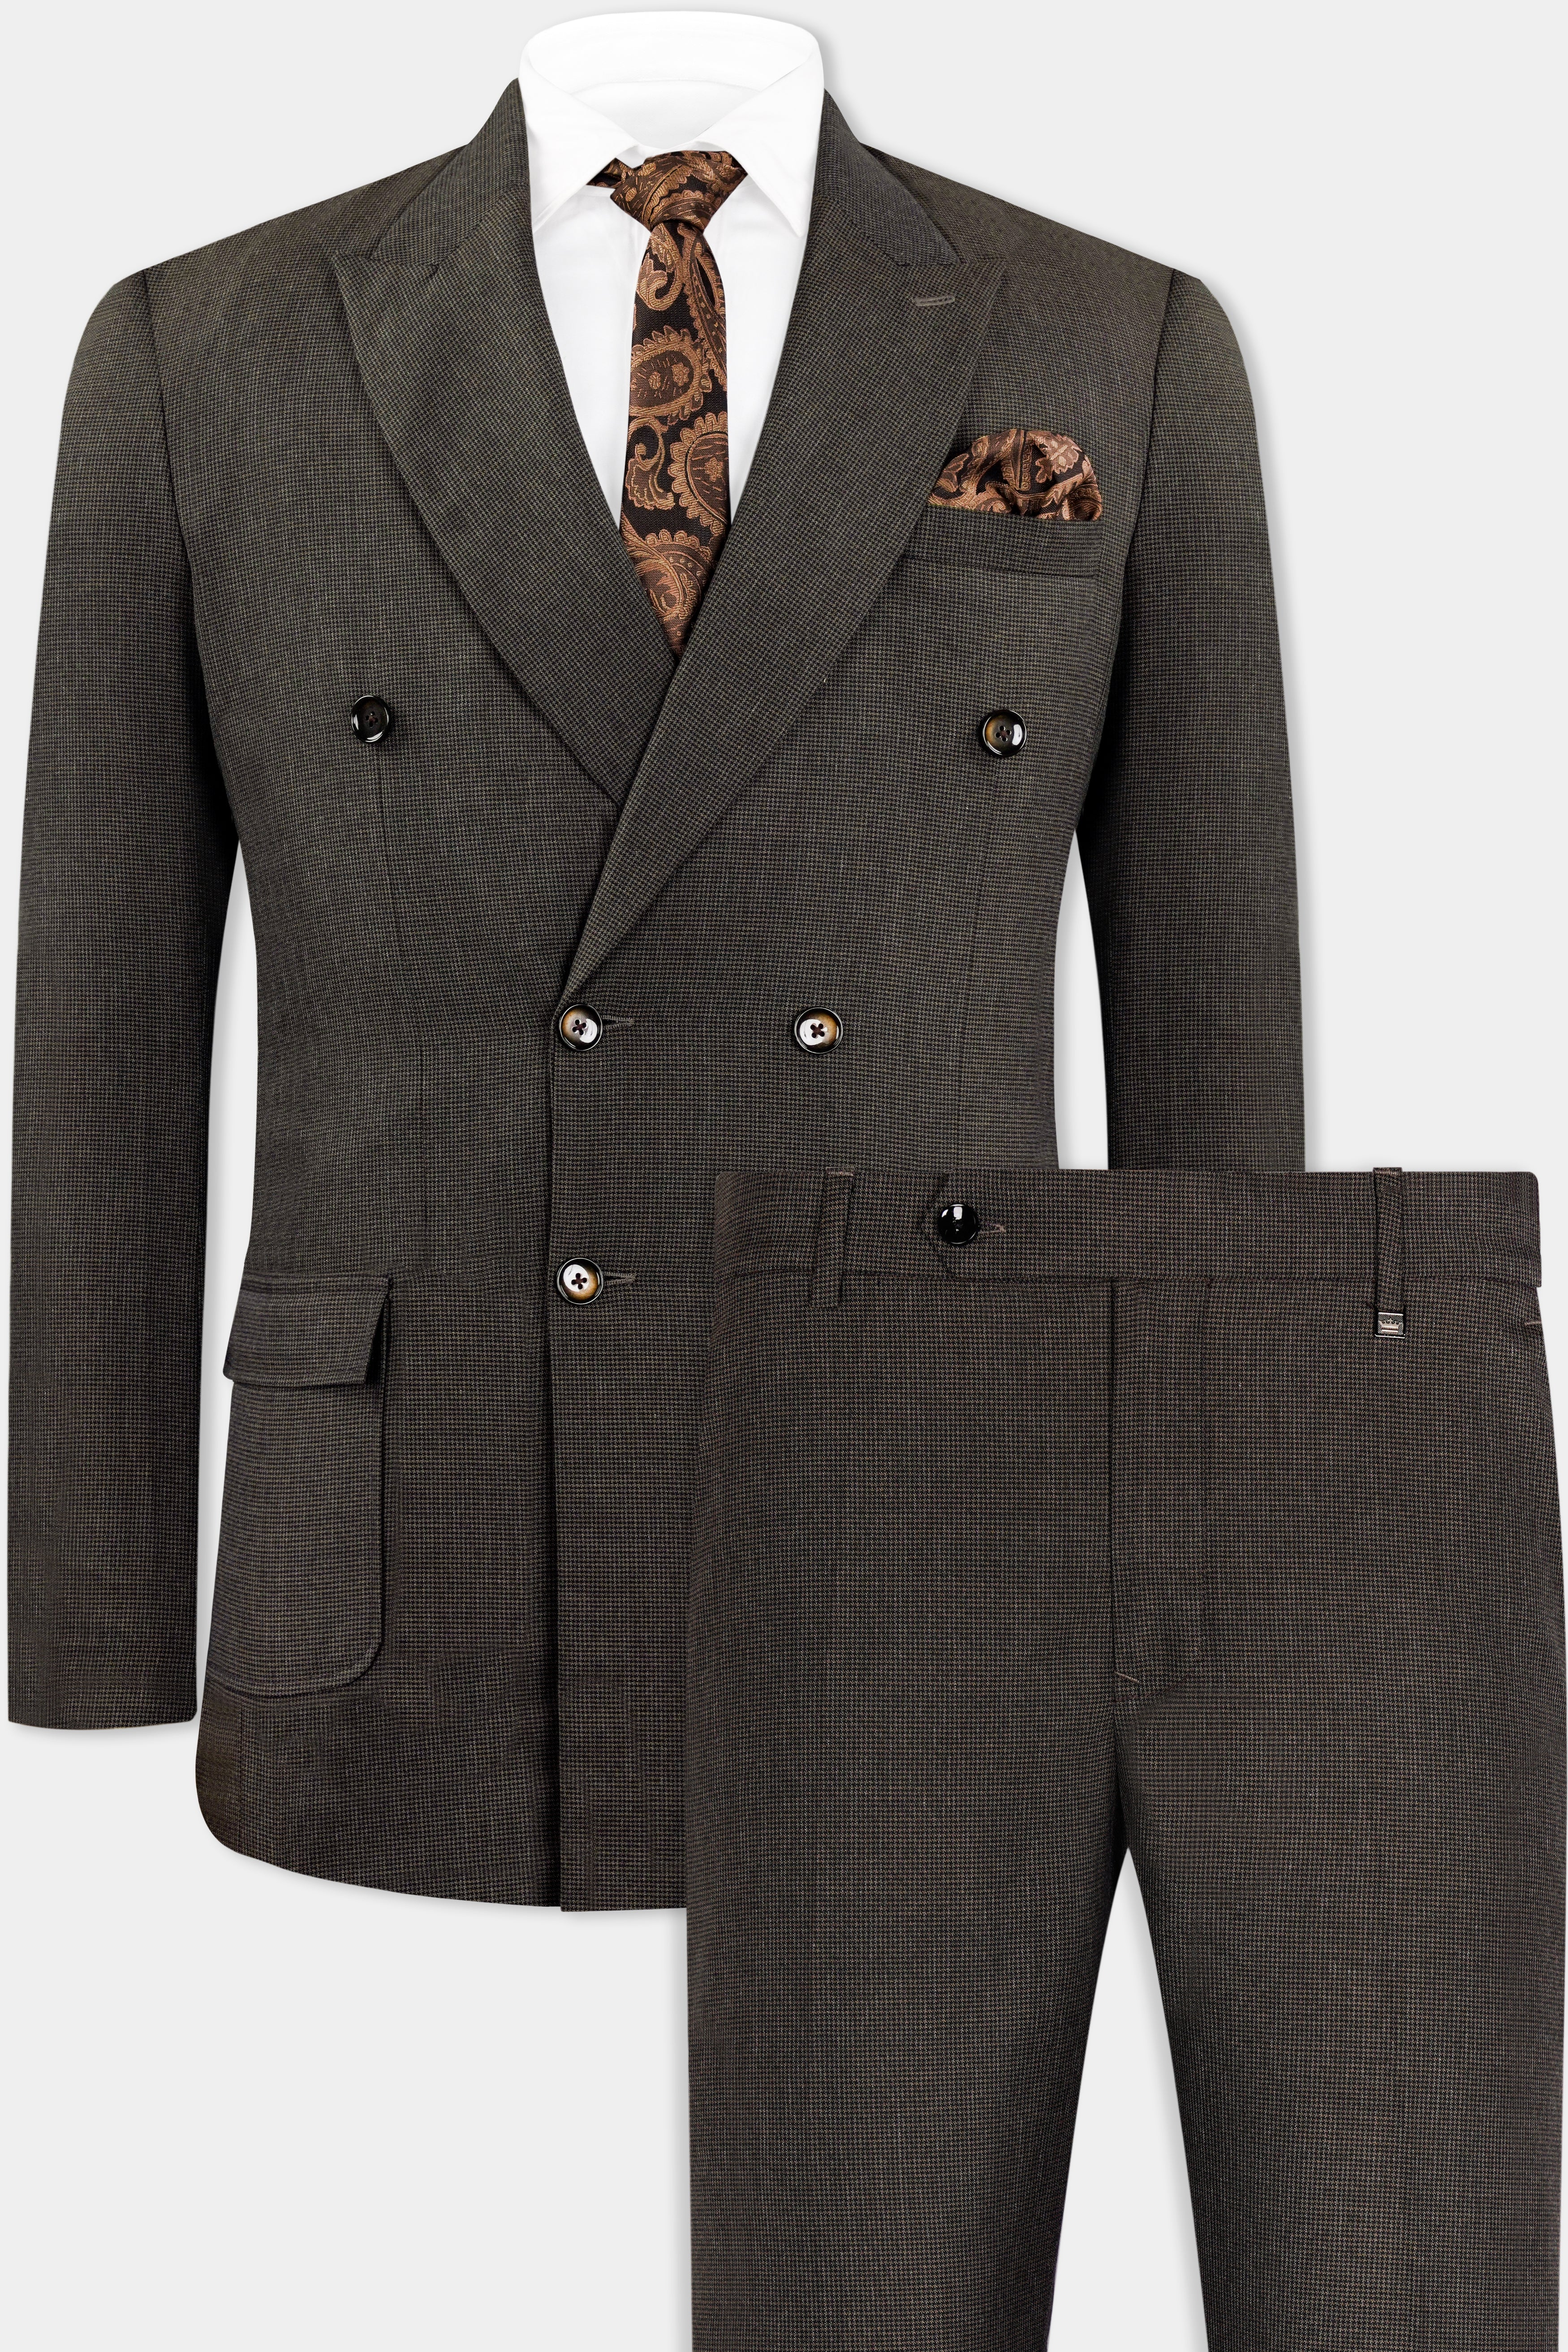 Taupe Brown Wool Rich Double Breasted Designer Suit ST2933-DB-D74-36,ST2933-DB-D74-38,ST2933-DB-D74-40,ST2933-DB-D74-42,ST2933-DB-D74-44,ST2933-DB-D74-46,ST2933-DB-D74-48,ST2933-DB-D74-50,ST2933-DB-D74-52,ST2933-DB-D74-54,ST2933-DB-D74-56,ST2933-DB-D74-58,ST2933-DB-D74-60